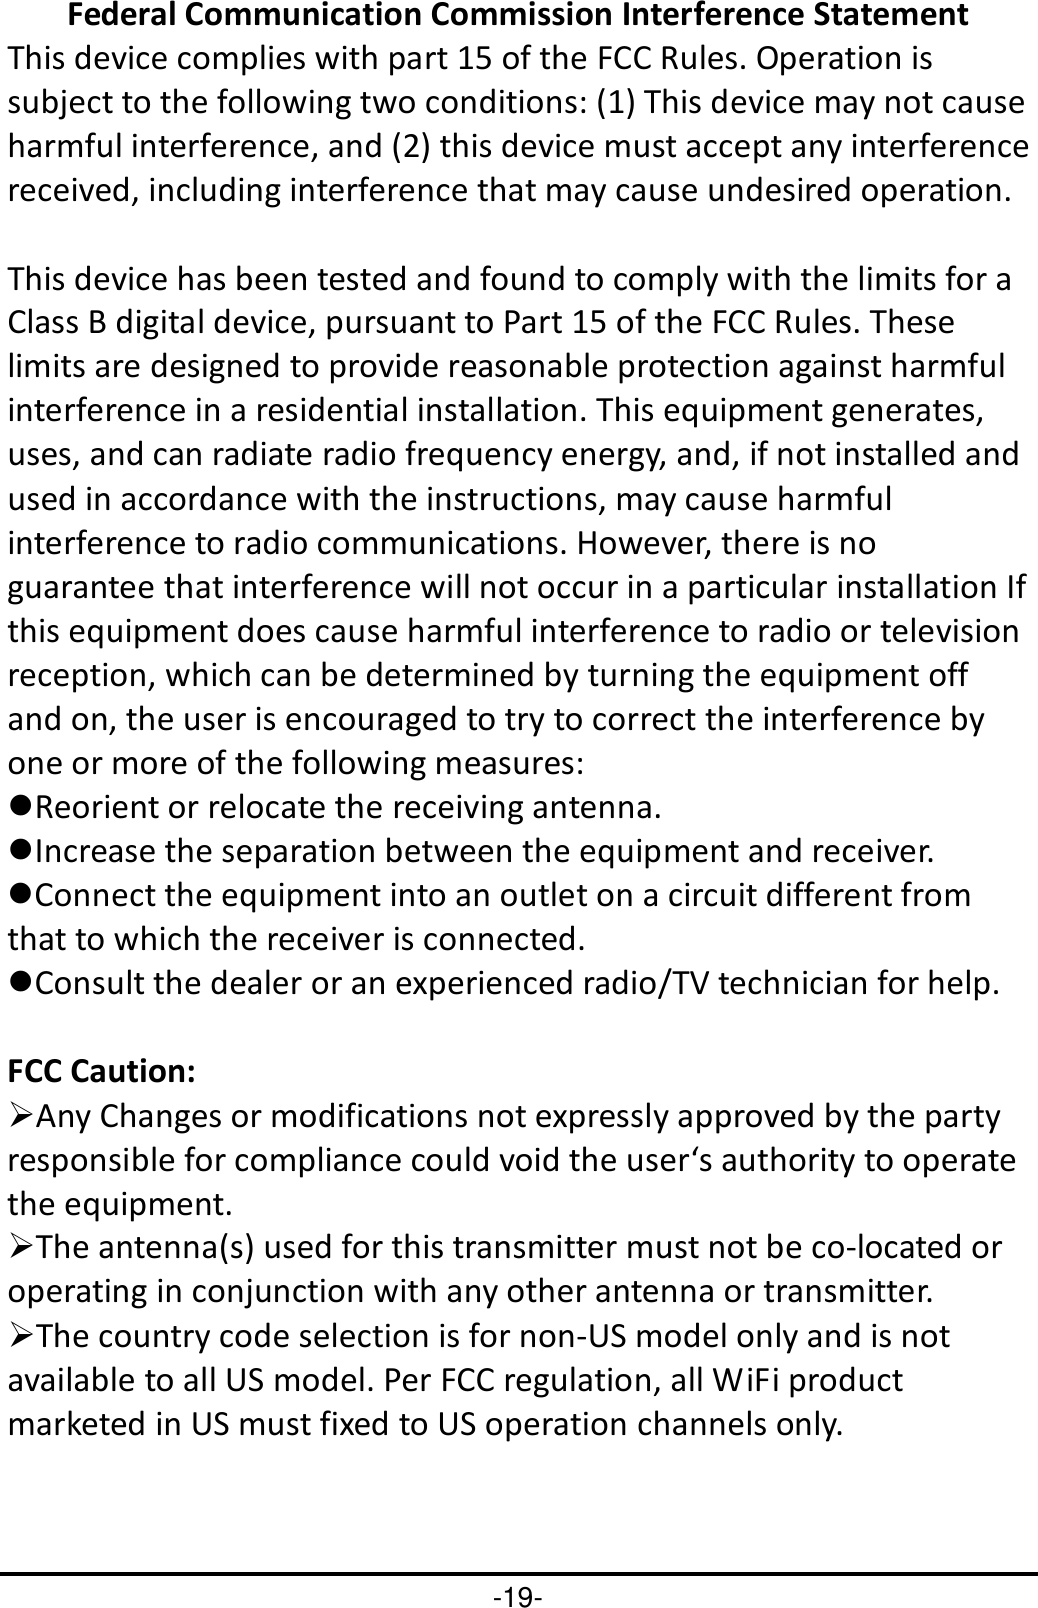 -19- Federal Communication Commission Interference Statement This device complies with part 15 of the FCC Rules. Operation is subject to the following two conditions: (1) This device may not cause harmful interference, and (2) this device must accept any interference received, including interference that may cause undesired operation.  This device has been tested and found to comply with the limits for a Class B digital device, pursuant to Part 15 of the FCC Rules. These limits are designed to provide reasonable protection against harmful interference in a residential installation. This equipment generates, uses, and can radiate radio frequency energy, and, if not installed and used in accordance with the instructions, may cause harmful interference to radio communications. However, there is no guarantee that interference will not occur in a particular installation If this equipment does cause harmful interference to radio or television reception, which can be determined by turning the equipment off and on, the user is encouraged to try to correct the interference by one or more of the following measures: Reorient or relocate the receiving antenna. Increase the separation between the equipment and receiver. Connect the equipment into an outlet on a circuit different from that to which the receiver is connected. Consult the dealer or an experienced radio/TV technician for help.  FCC Caution: Any Changes or modifications not expressly approved by the party responsible for compliance could void the user‘s authority to operate the equipment. The antenna(s) used for this transmitter must not be co-located or operating in conjunction with any other antenna or transmitter. The country code selection is for non-US model only and is not available to all US model. Per FCC regulation, all WiFi product marketed in US must fixed to US operation channels only.   